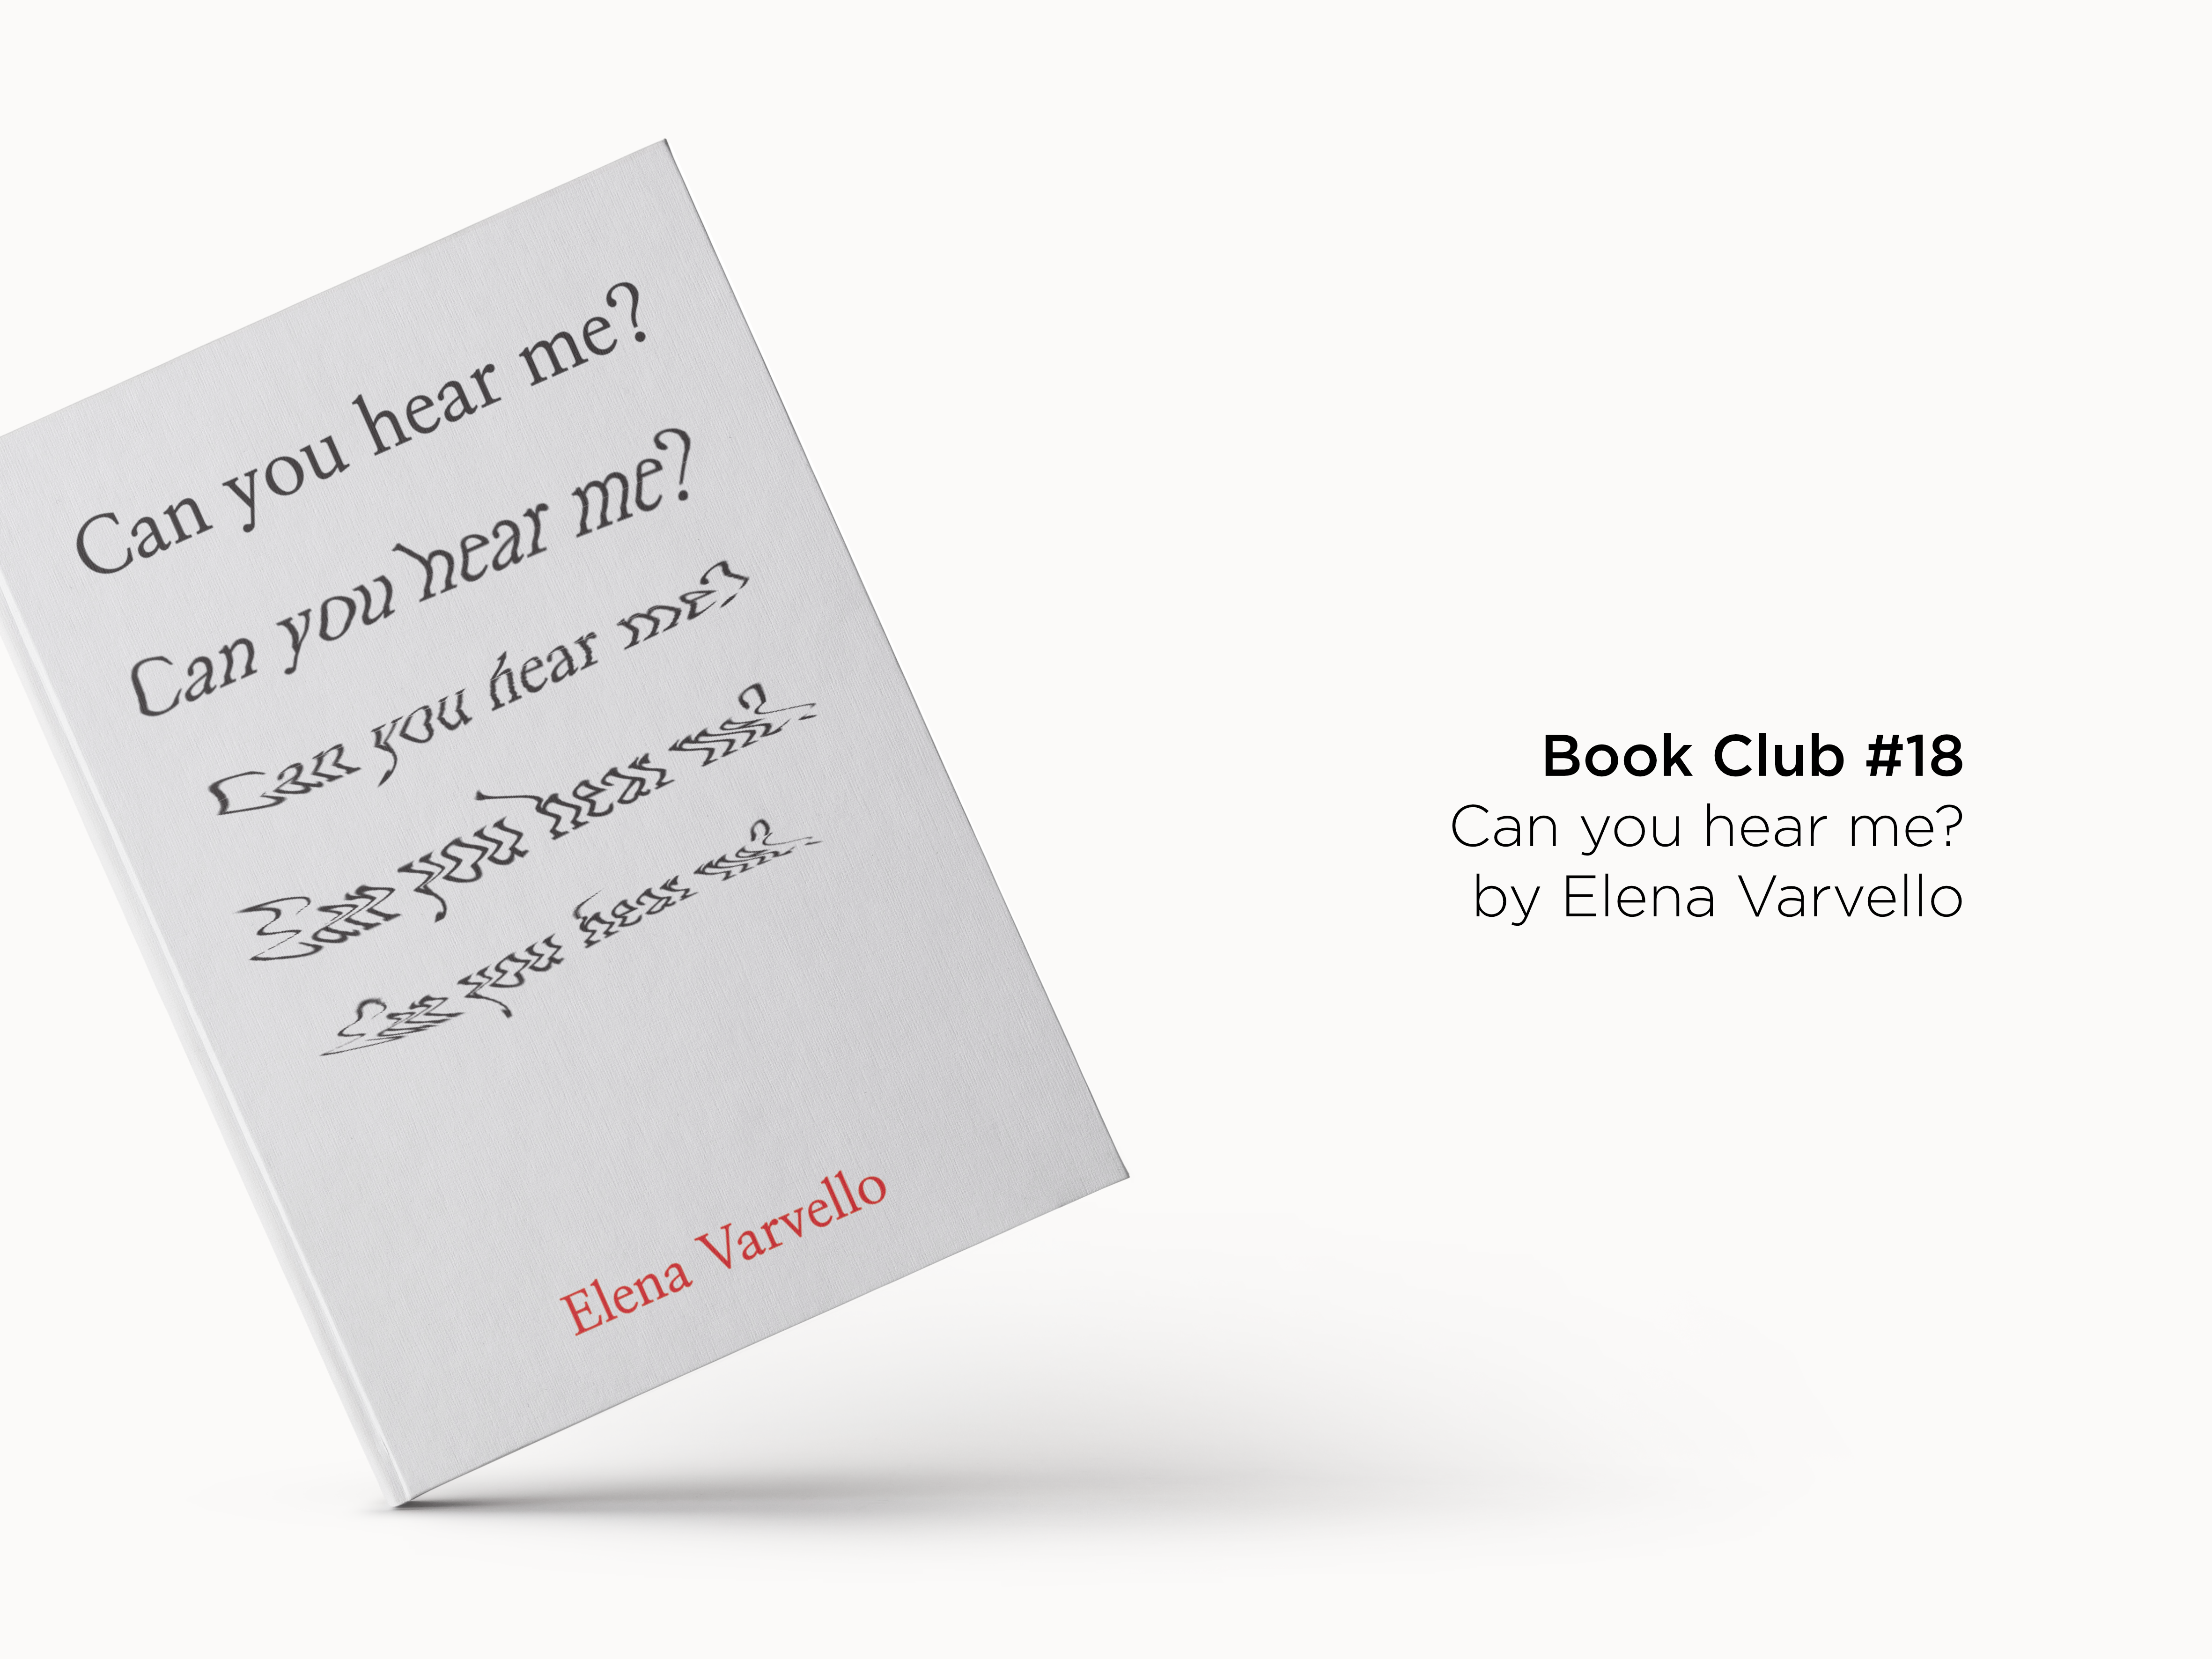 Can you hear me? by Elena Varvello cover design